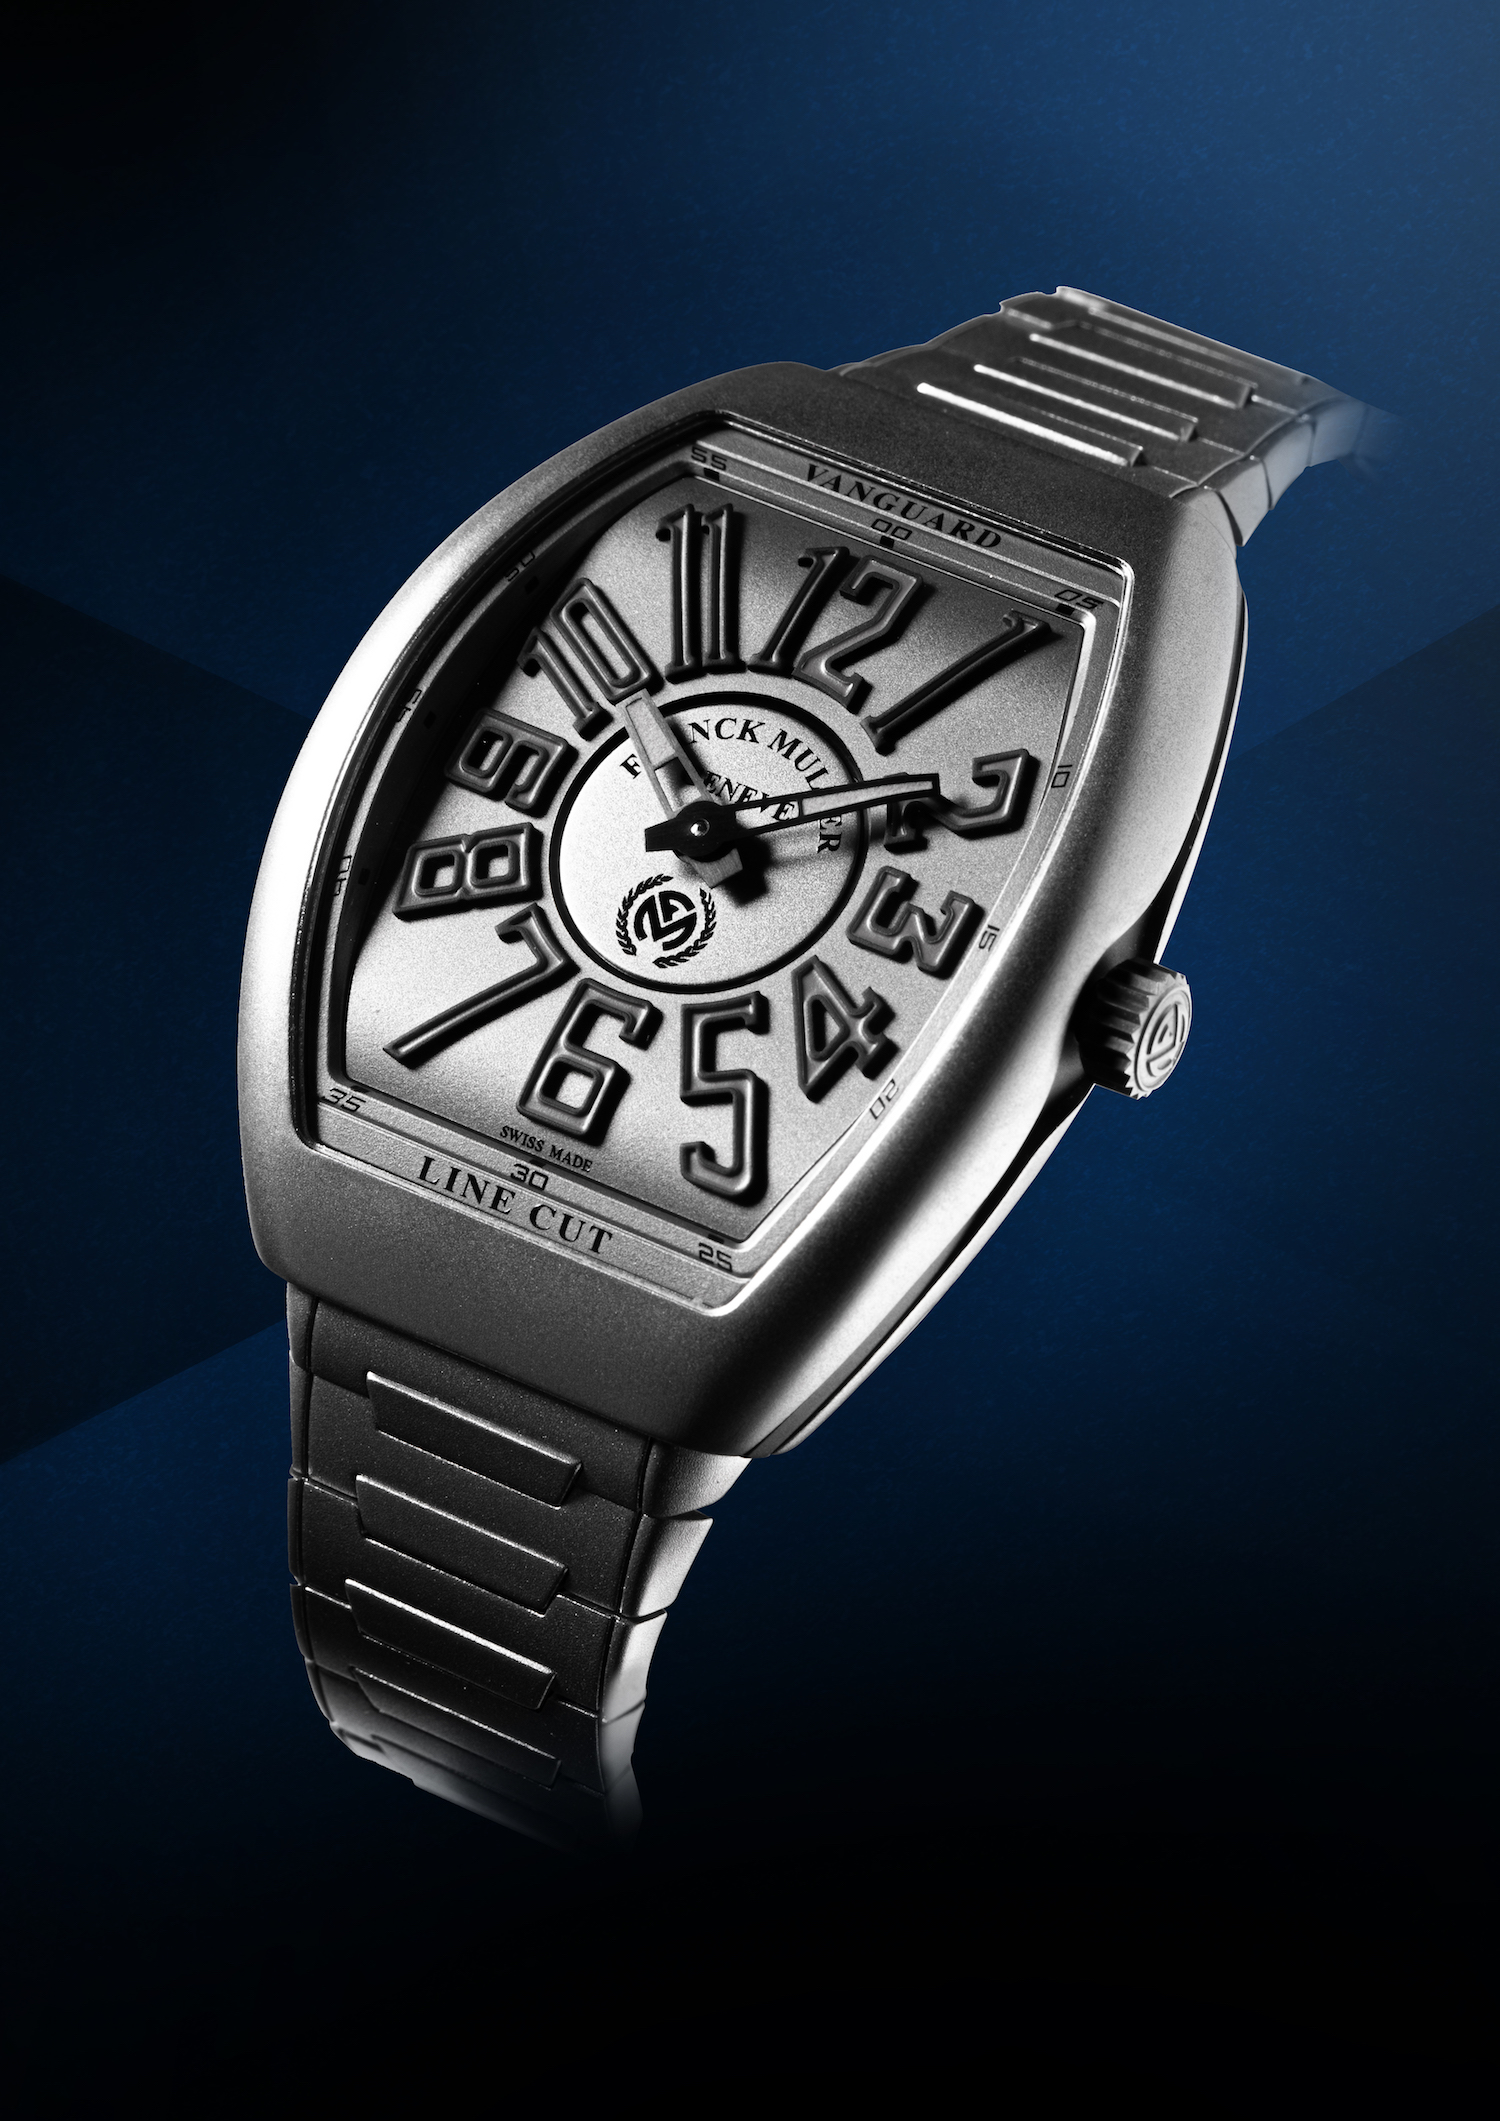 Franck Muller Goes Gray with Newest Vanguard